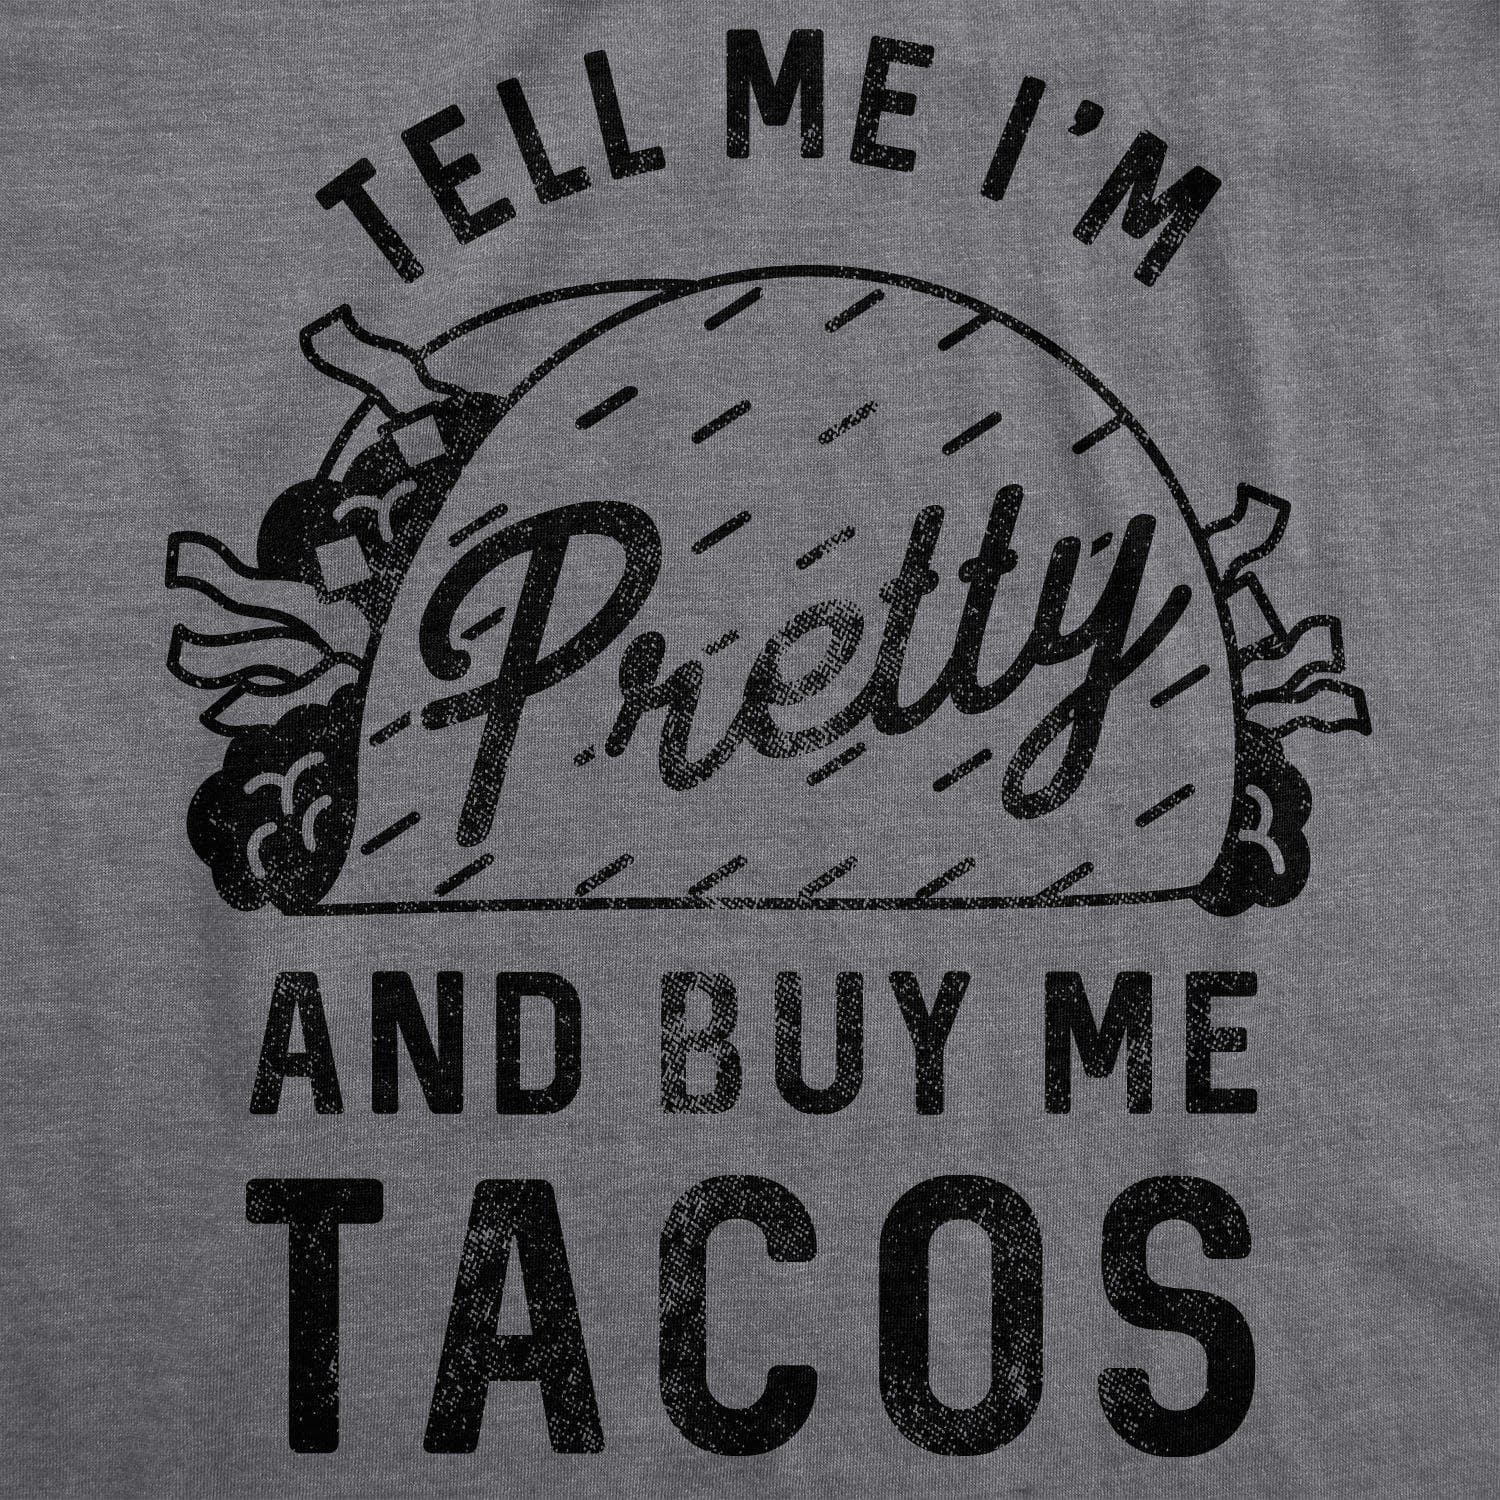 Tell Me I'm Pretty And Buy Me Tacos Women's Tank Top  -  Crazy Dog T-Shirts